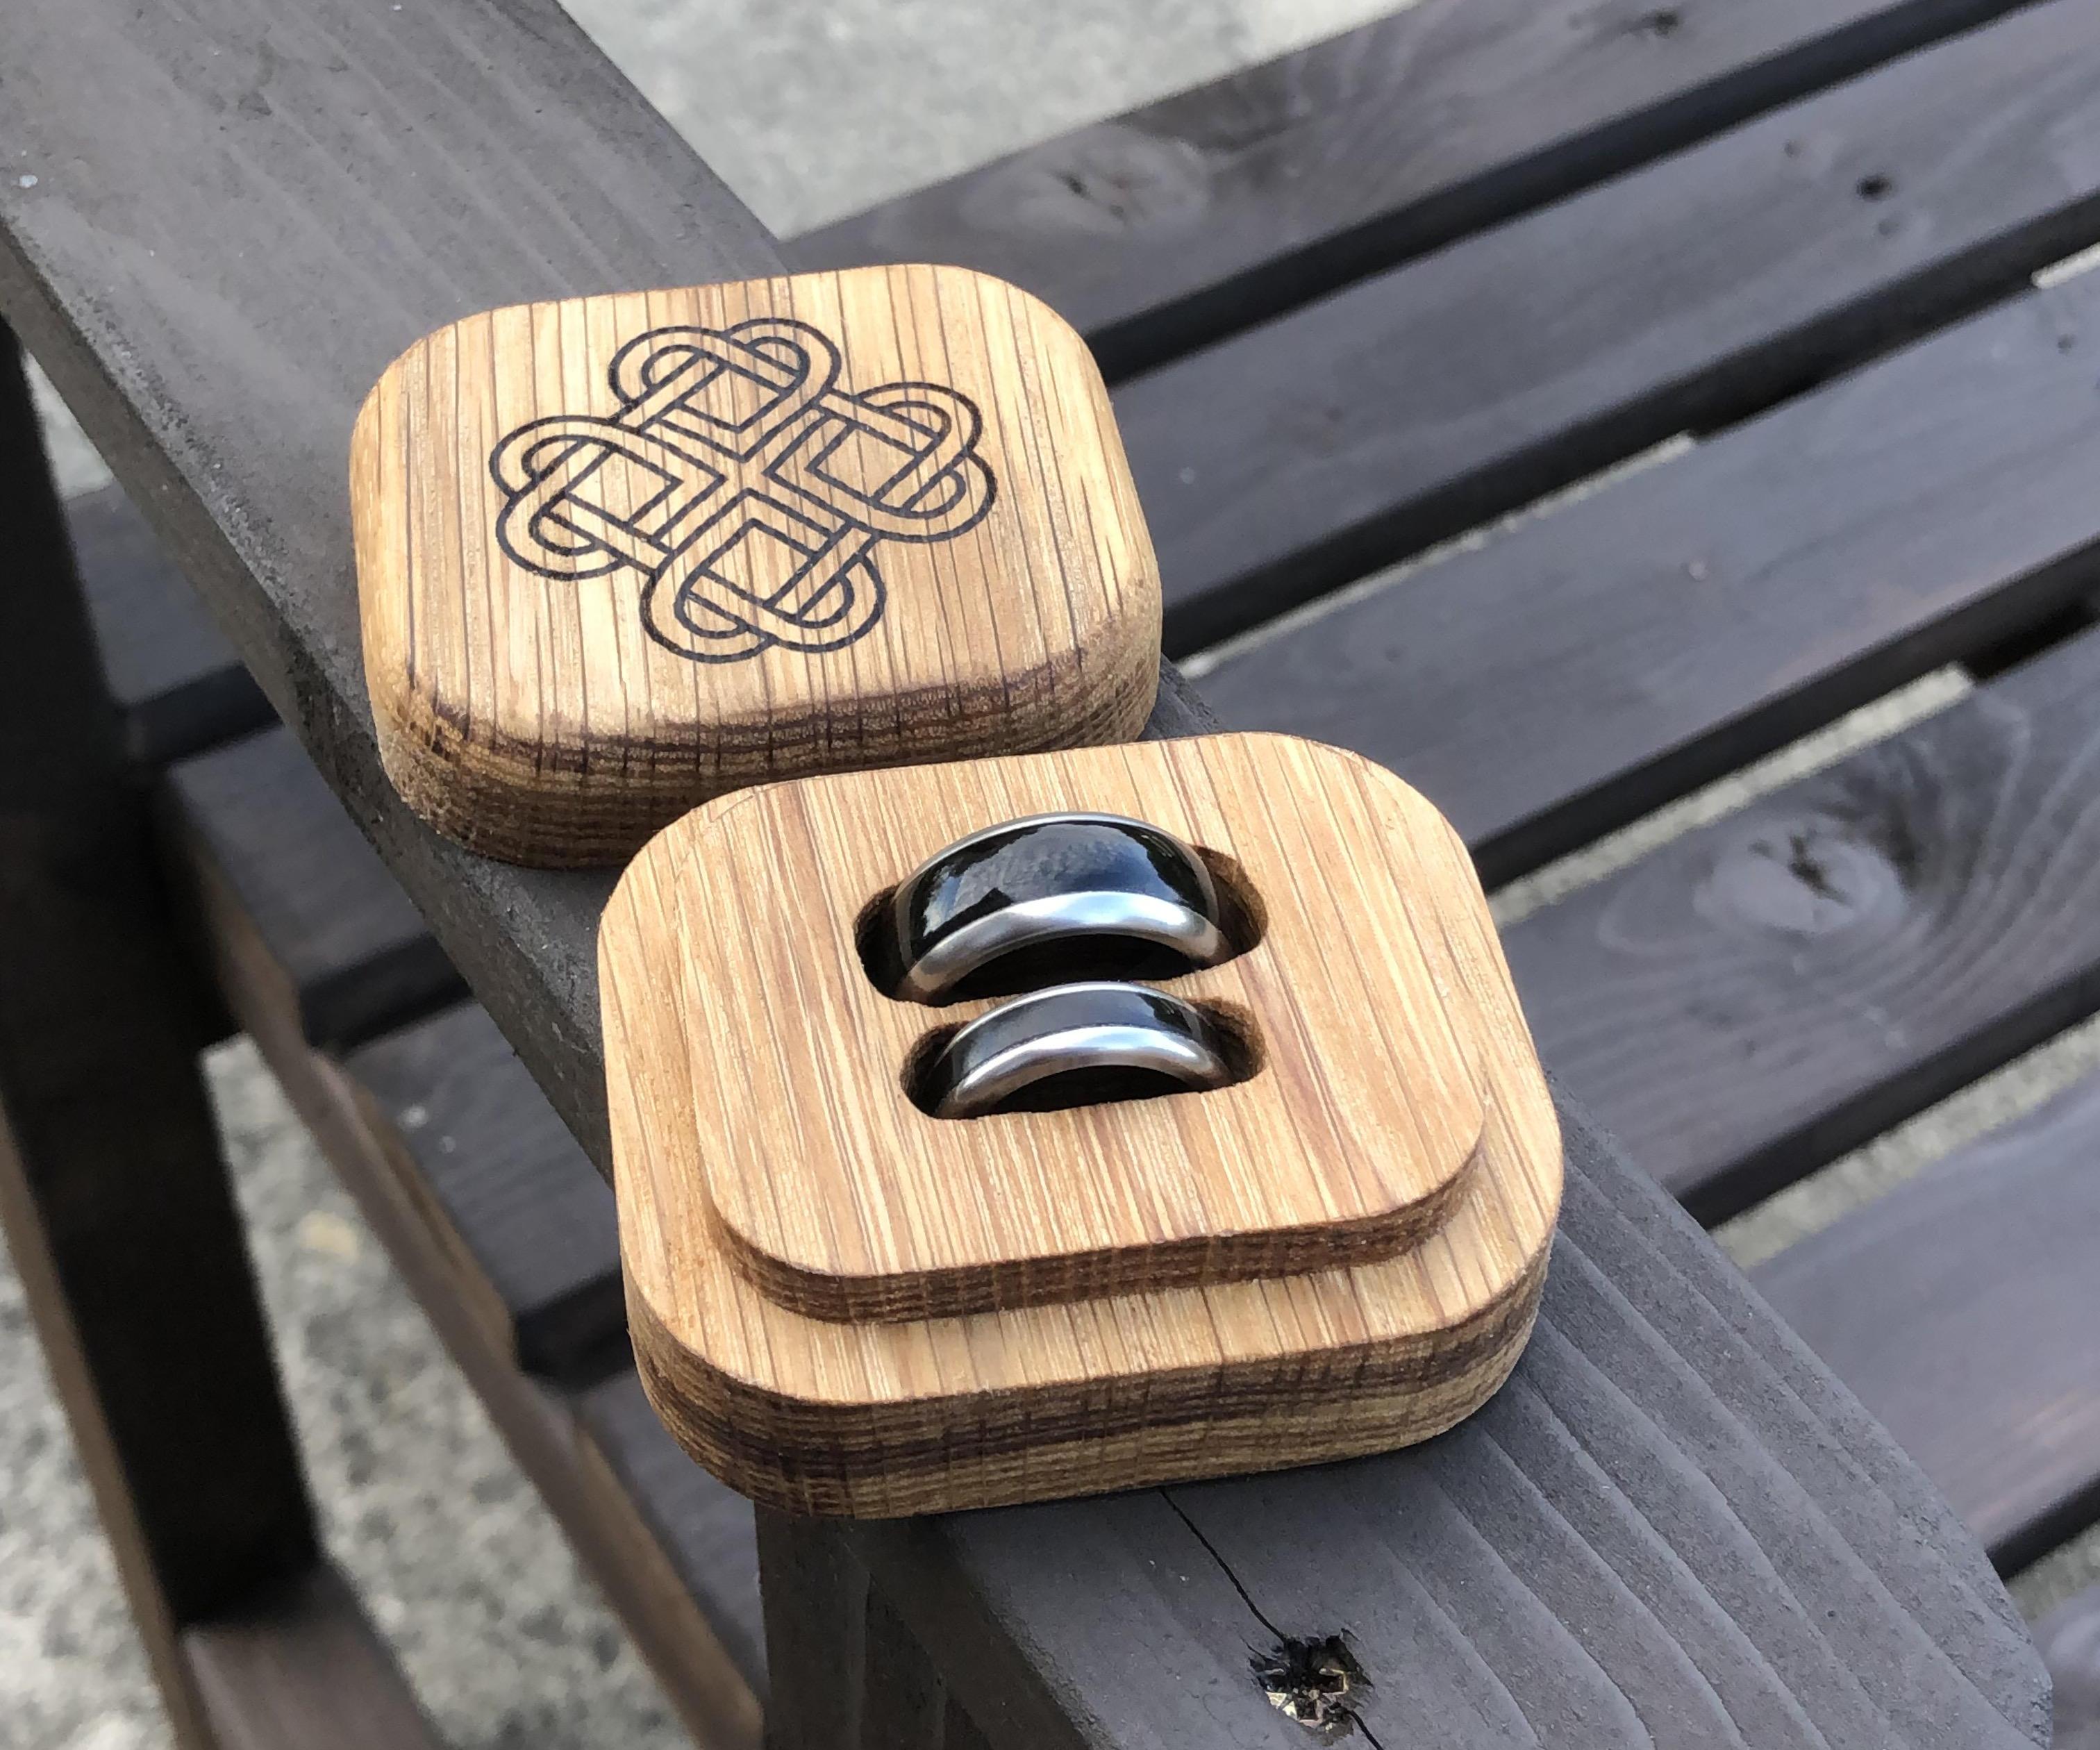 His and Her's Ebony/Titanium Wedding Rings With Laser Engraved Oak Presentation Box